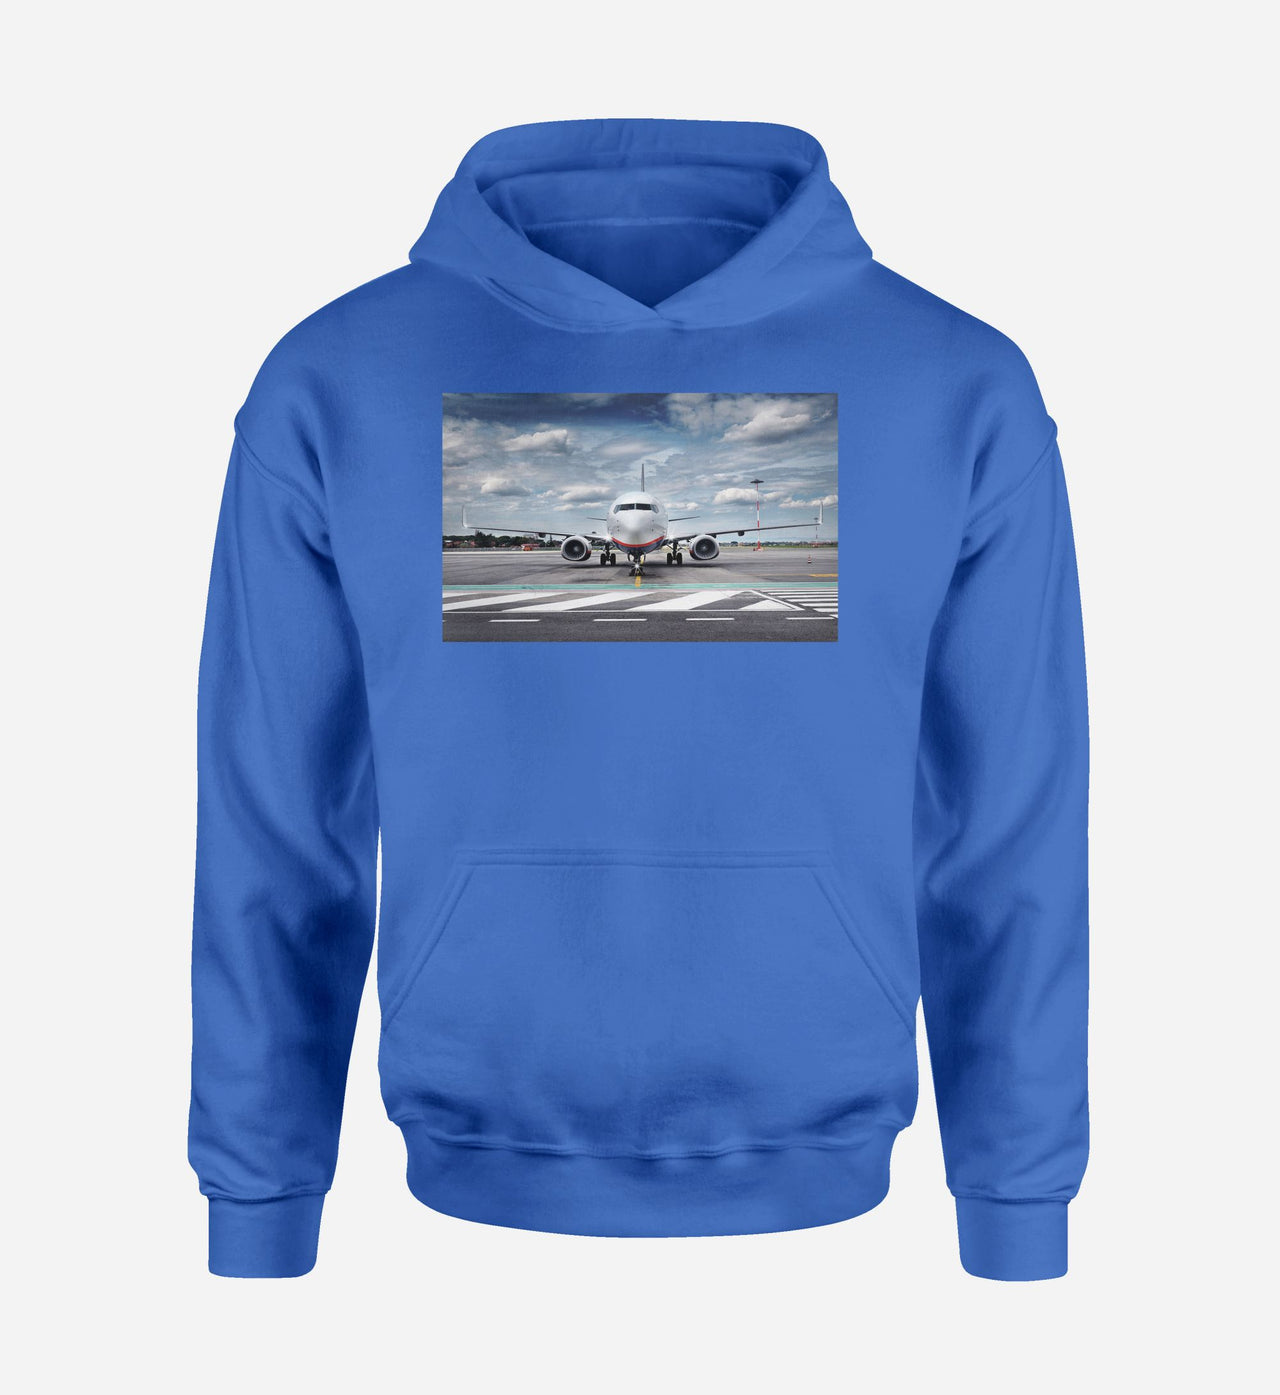 Amazing Clouds and Boeing 737 NG Designed Hoodies